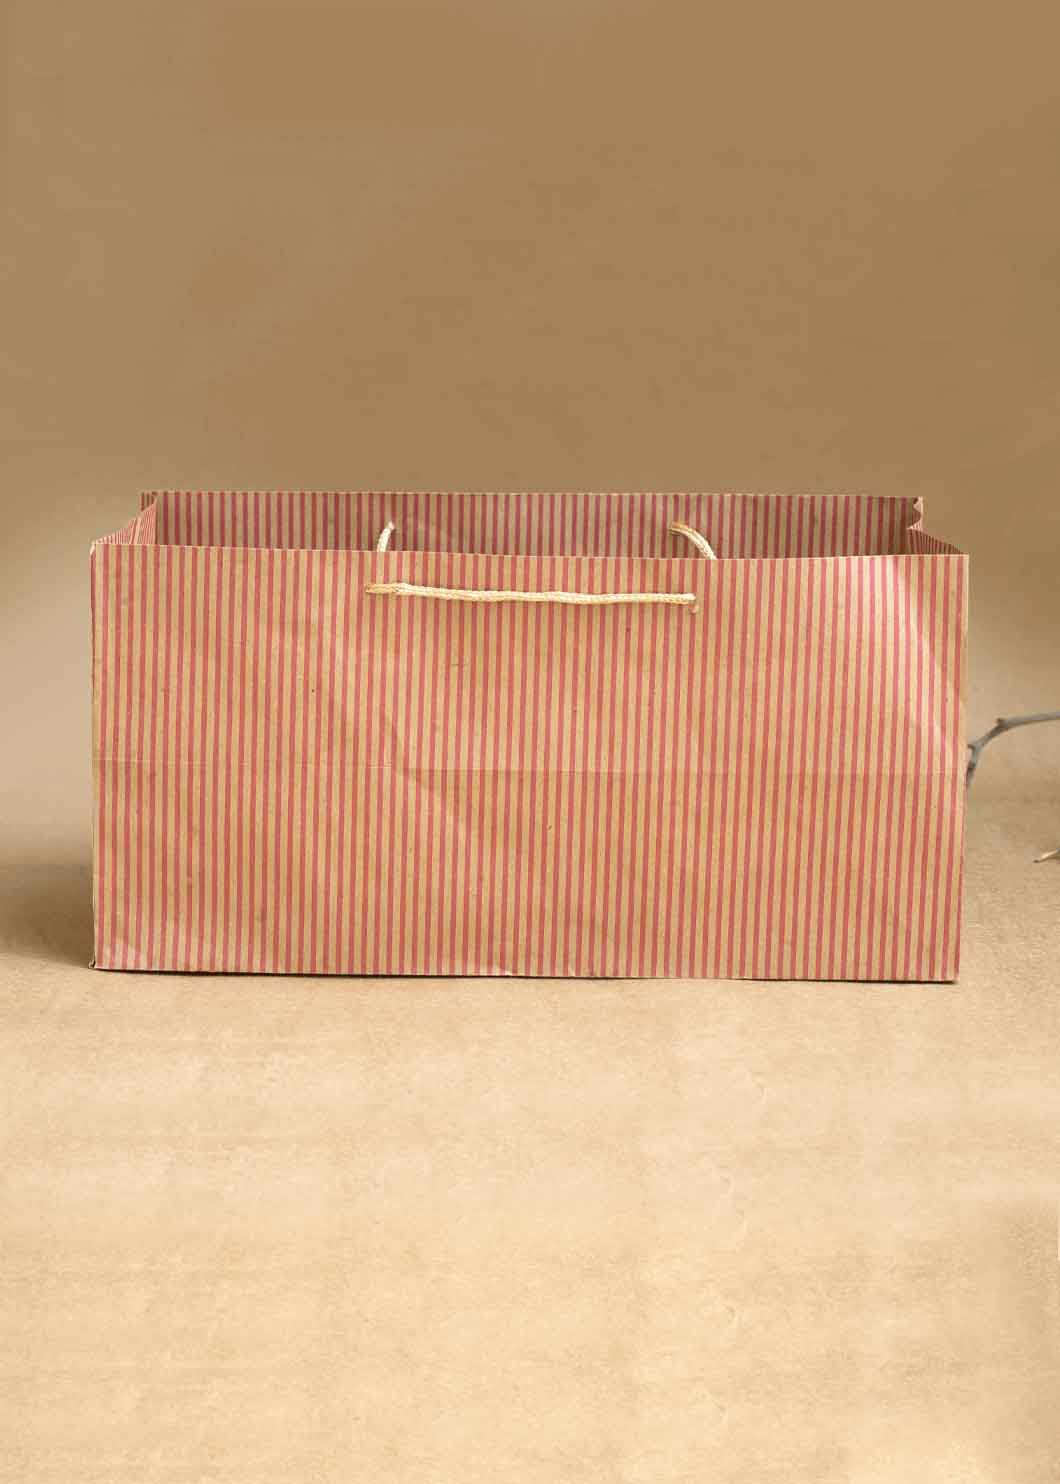 Craft Paper Bag Lines Pattern - Craft Paper Bag - Yellow Silver Red - 14x7 Square Paper Bag